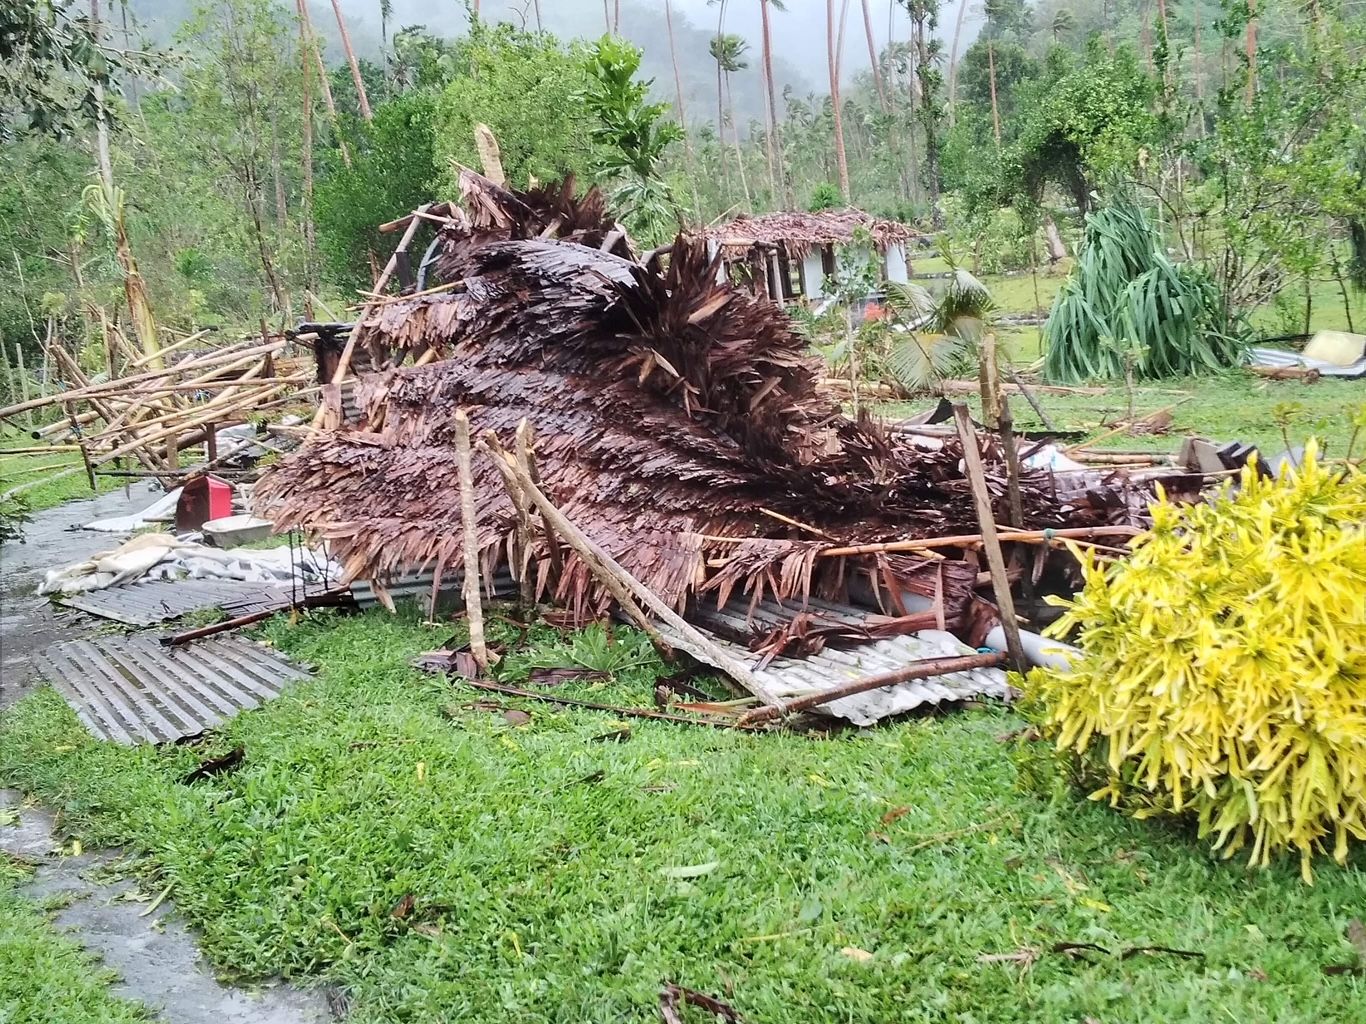 Homes, schools and food sources annihilated in the path of Cyclone Lola.Photo/Supplied